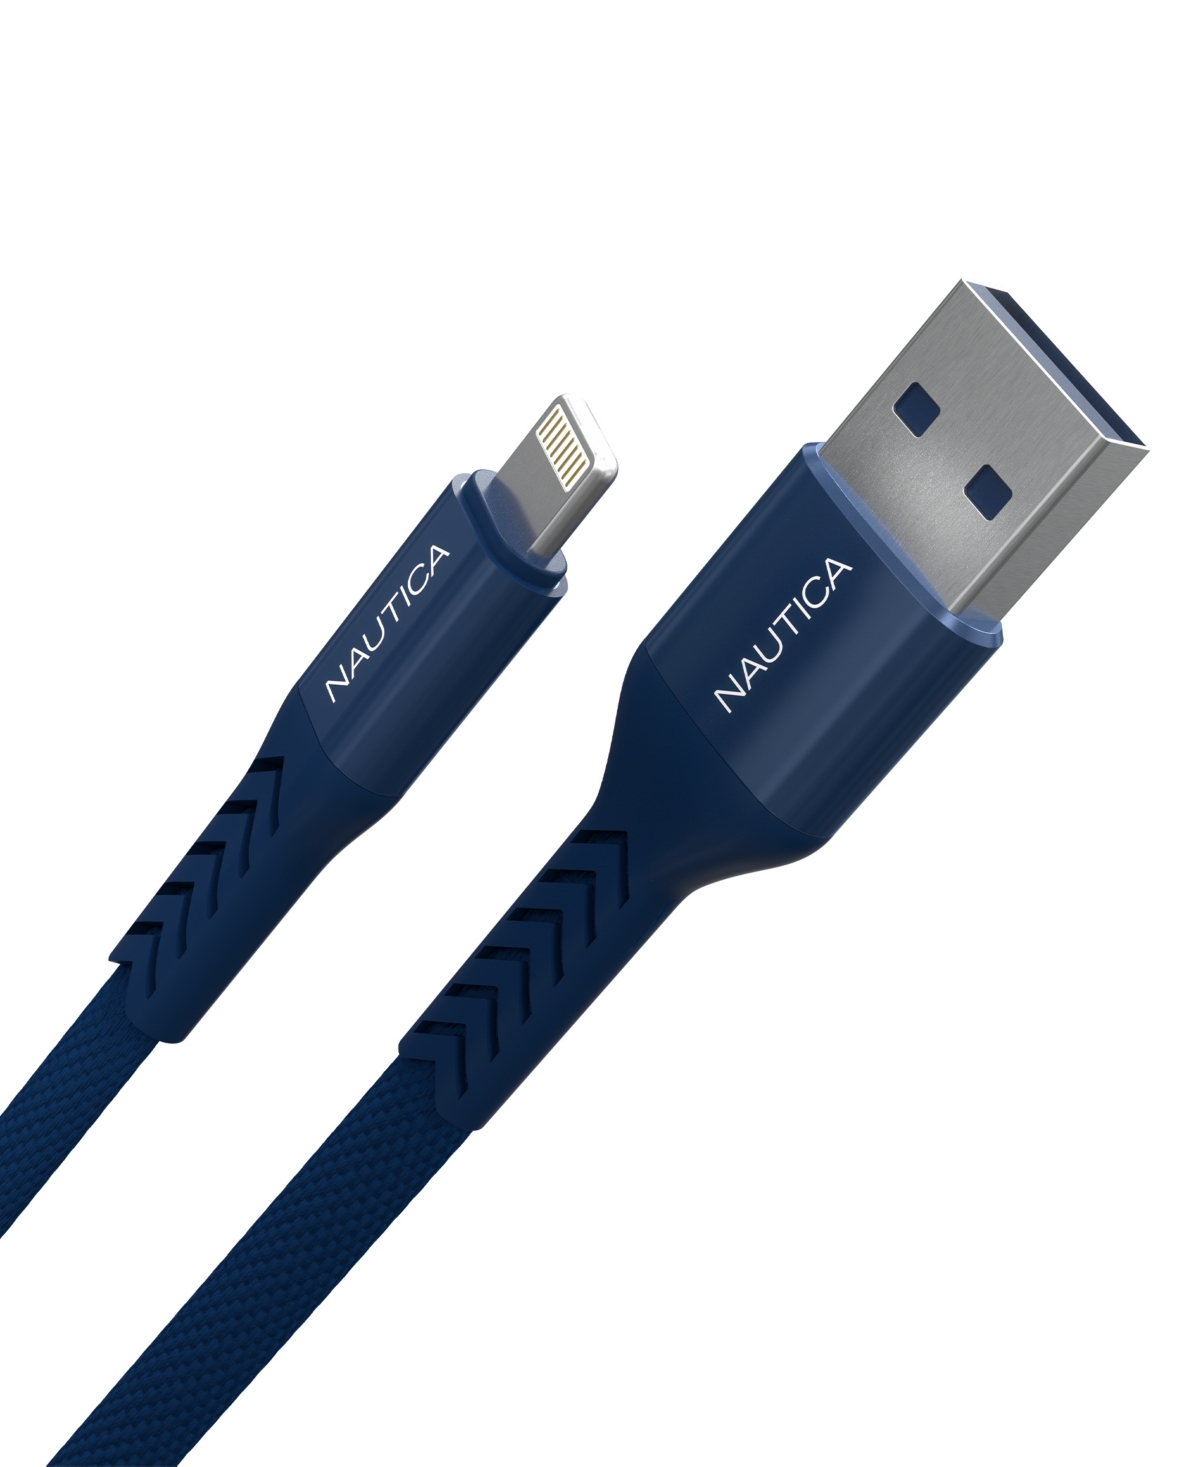 Nautica Usb A To Lighting Cable, Lighting To Usb A 2.4a Charging Cord, 4' In Navy